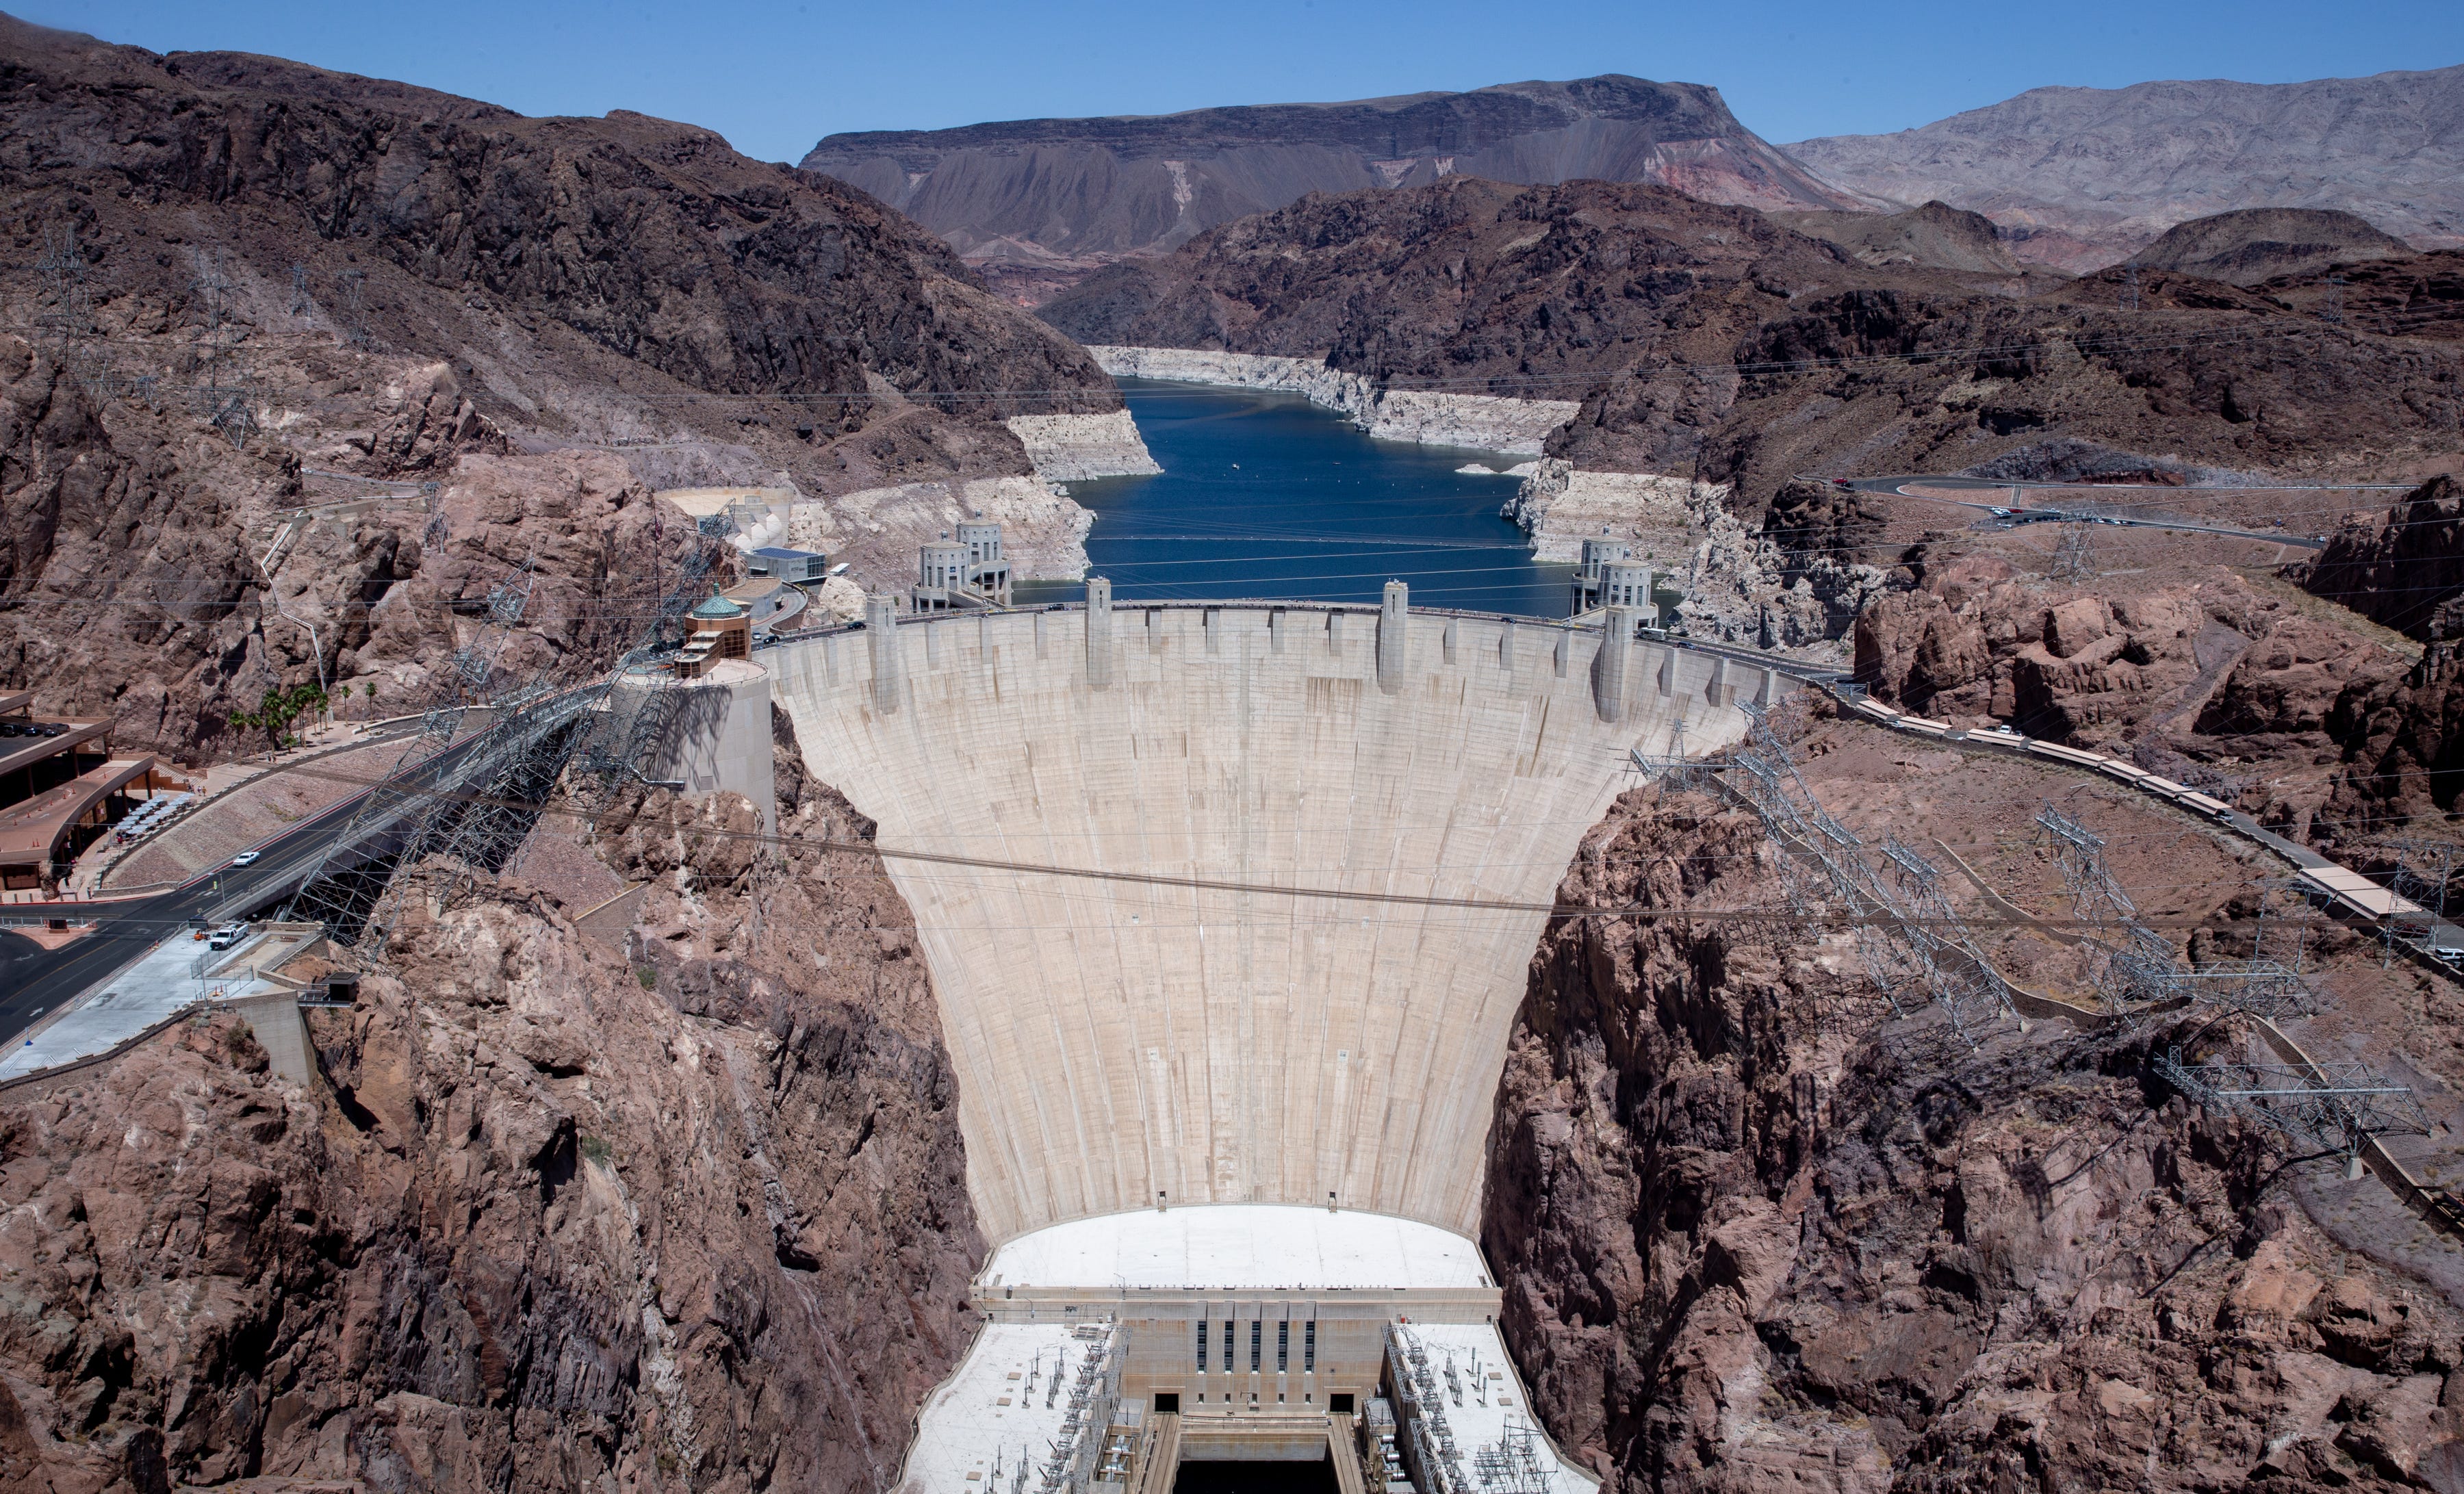 Hoover Dam, a symbol of the modern West, faces an epic water shortage